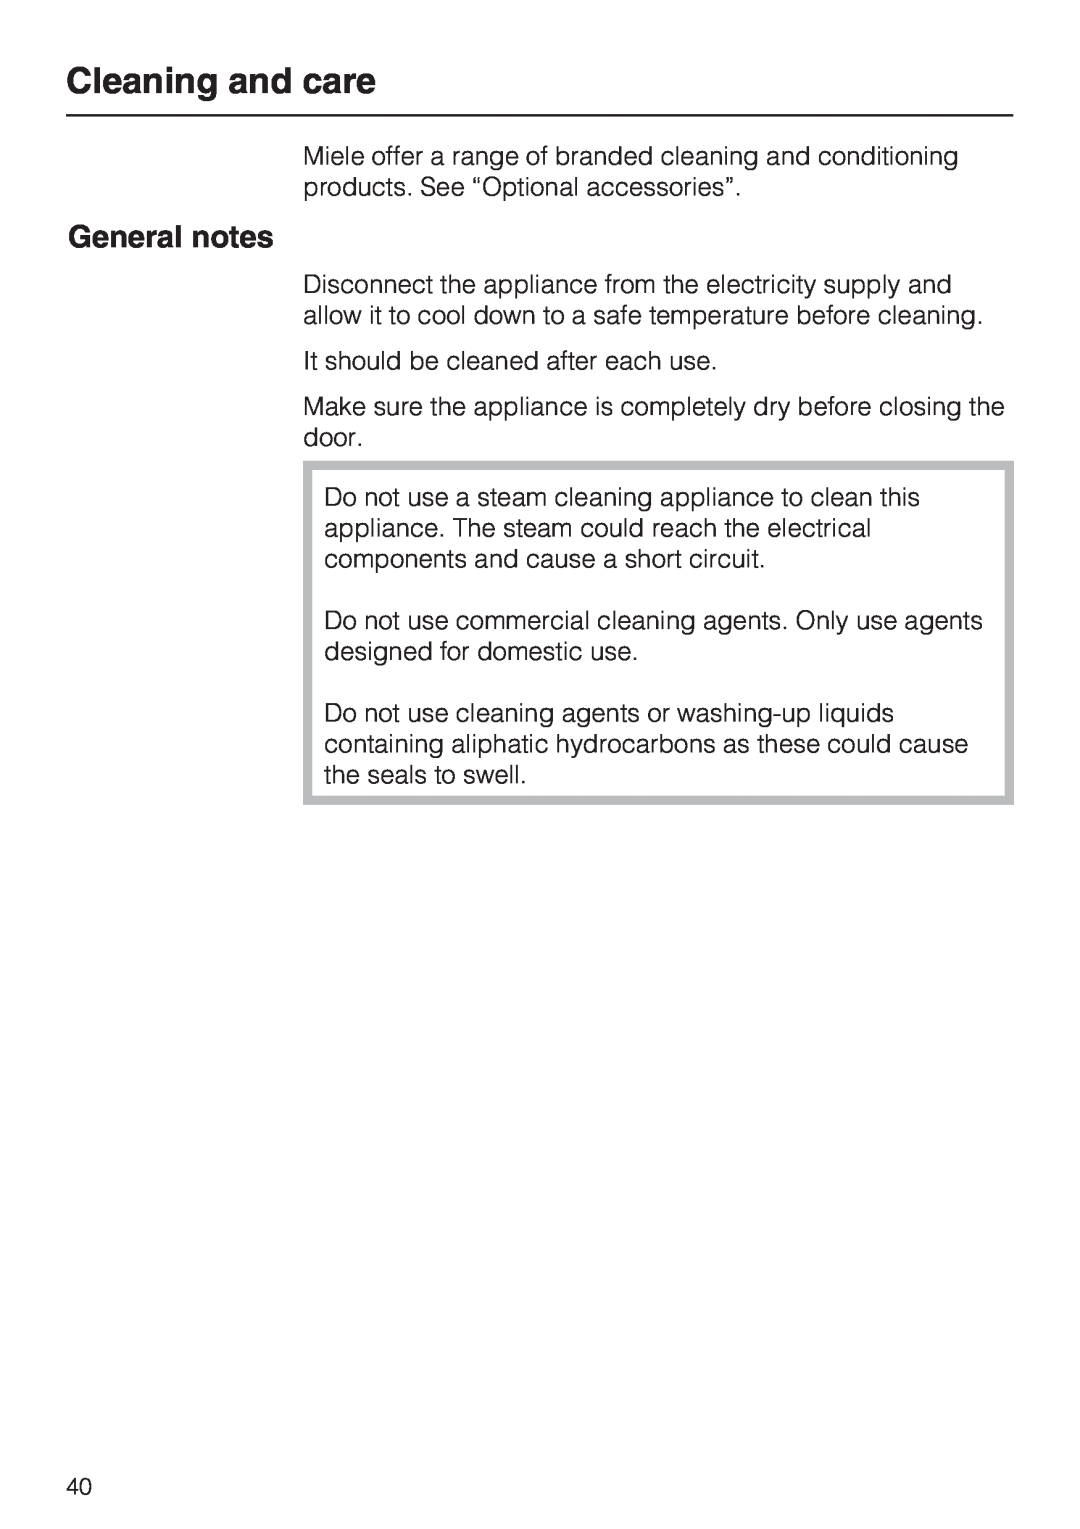 Miele DG 5088, DG 5070, DG 5080 installation instructions Cleaning and care, General notes 